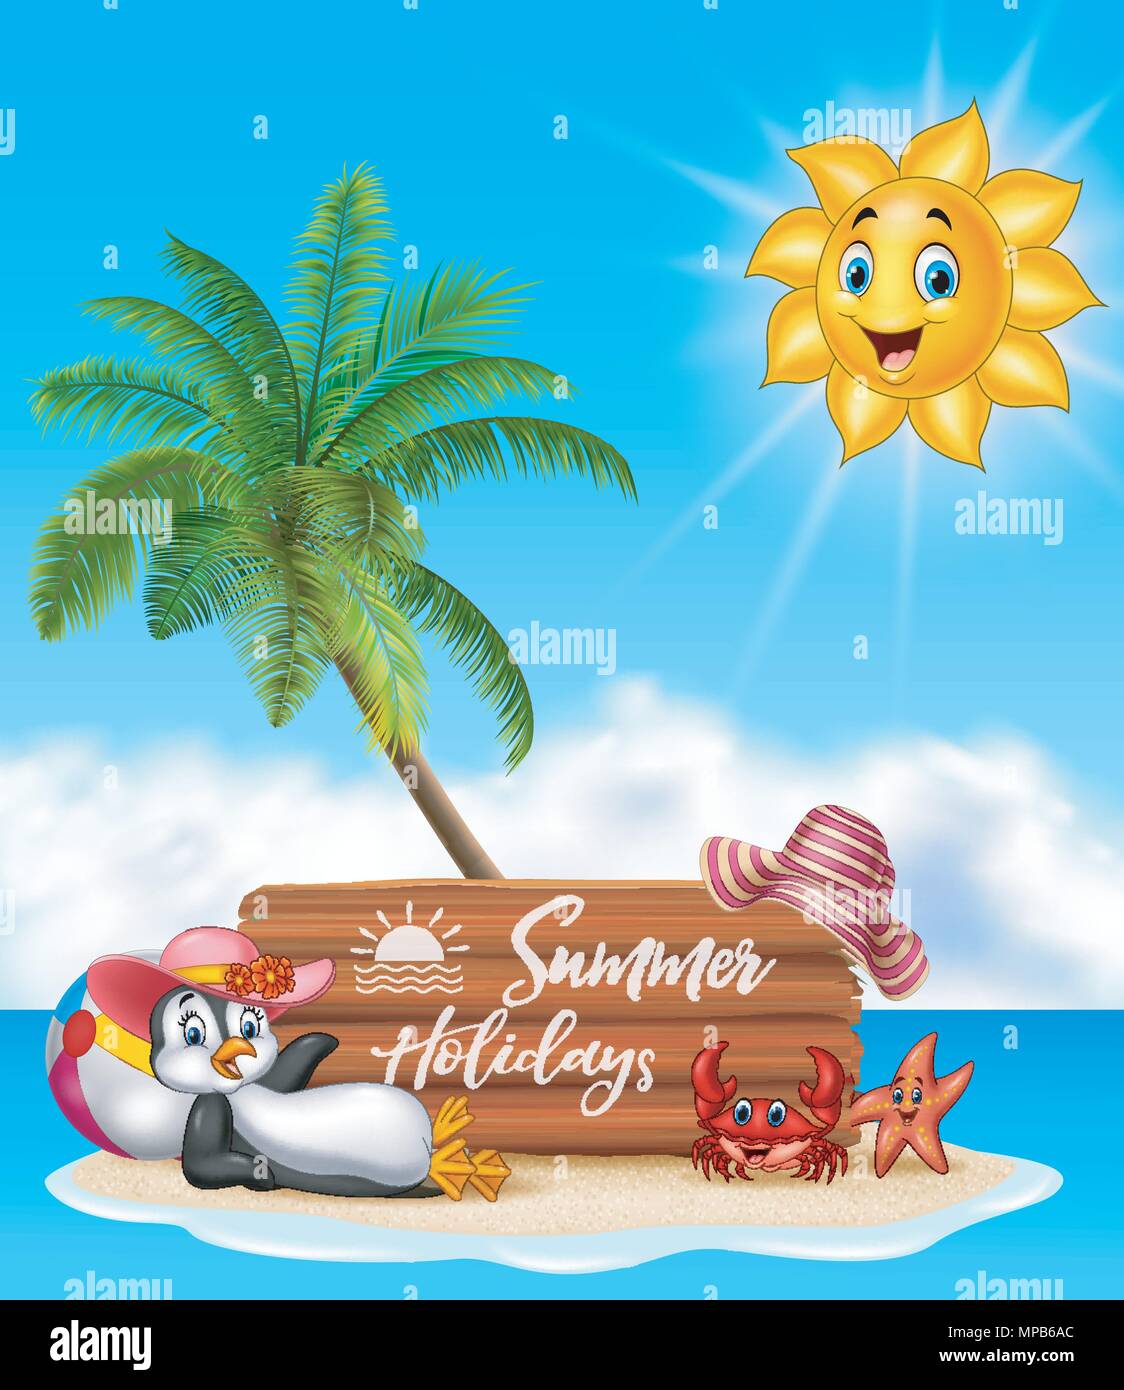 Summer holiday with wooden sign and funny animals Stock Vector